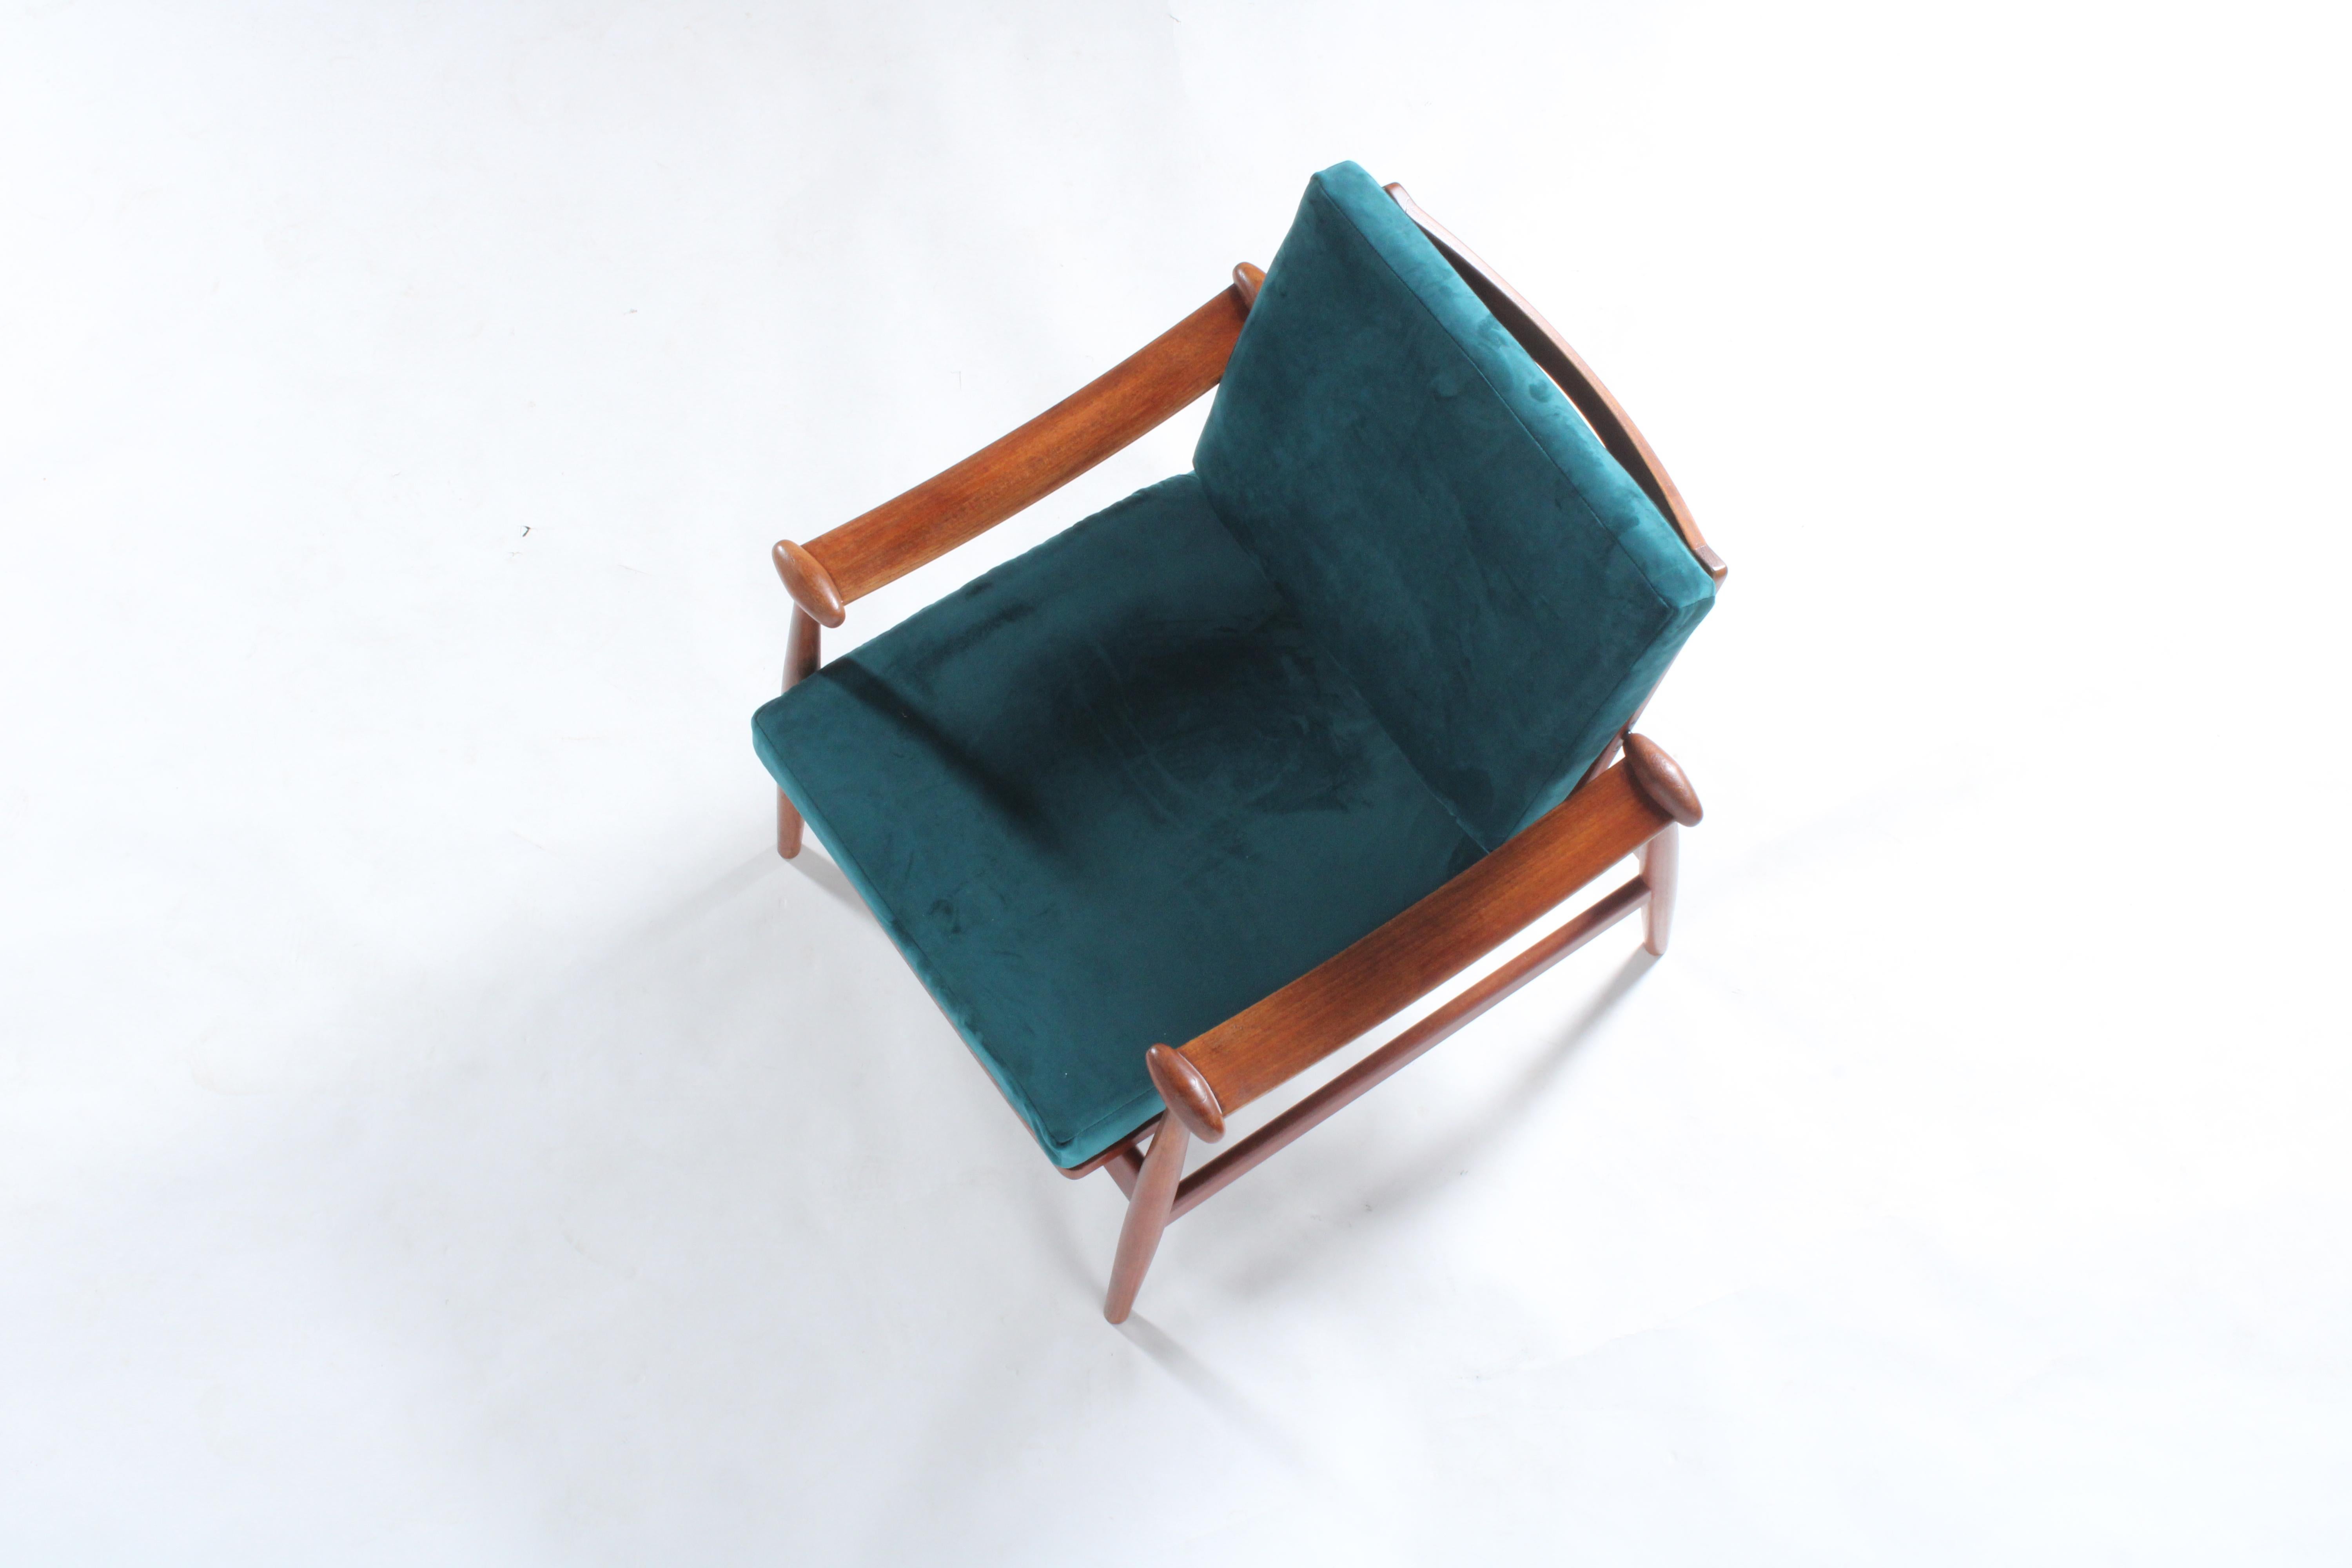 Exquisite Mid Century Danish Spade Chair By Finn Juhl For France & Son In Teak For Sale 8